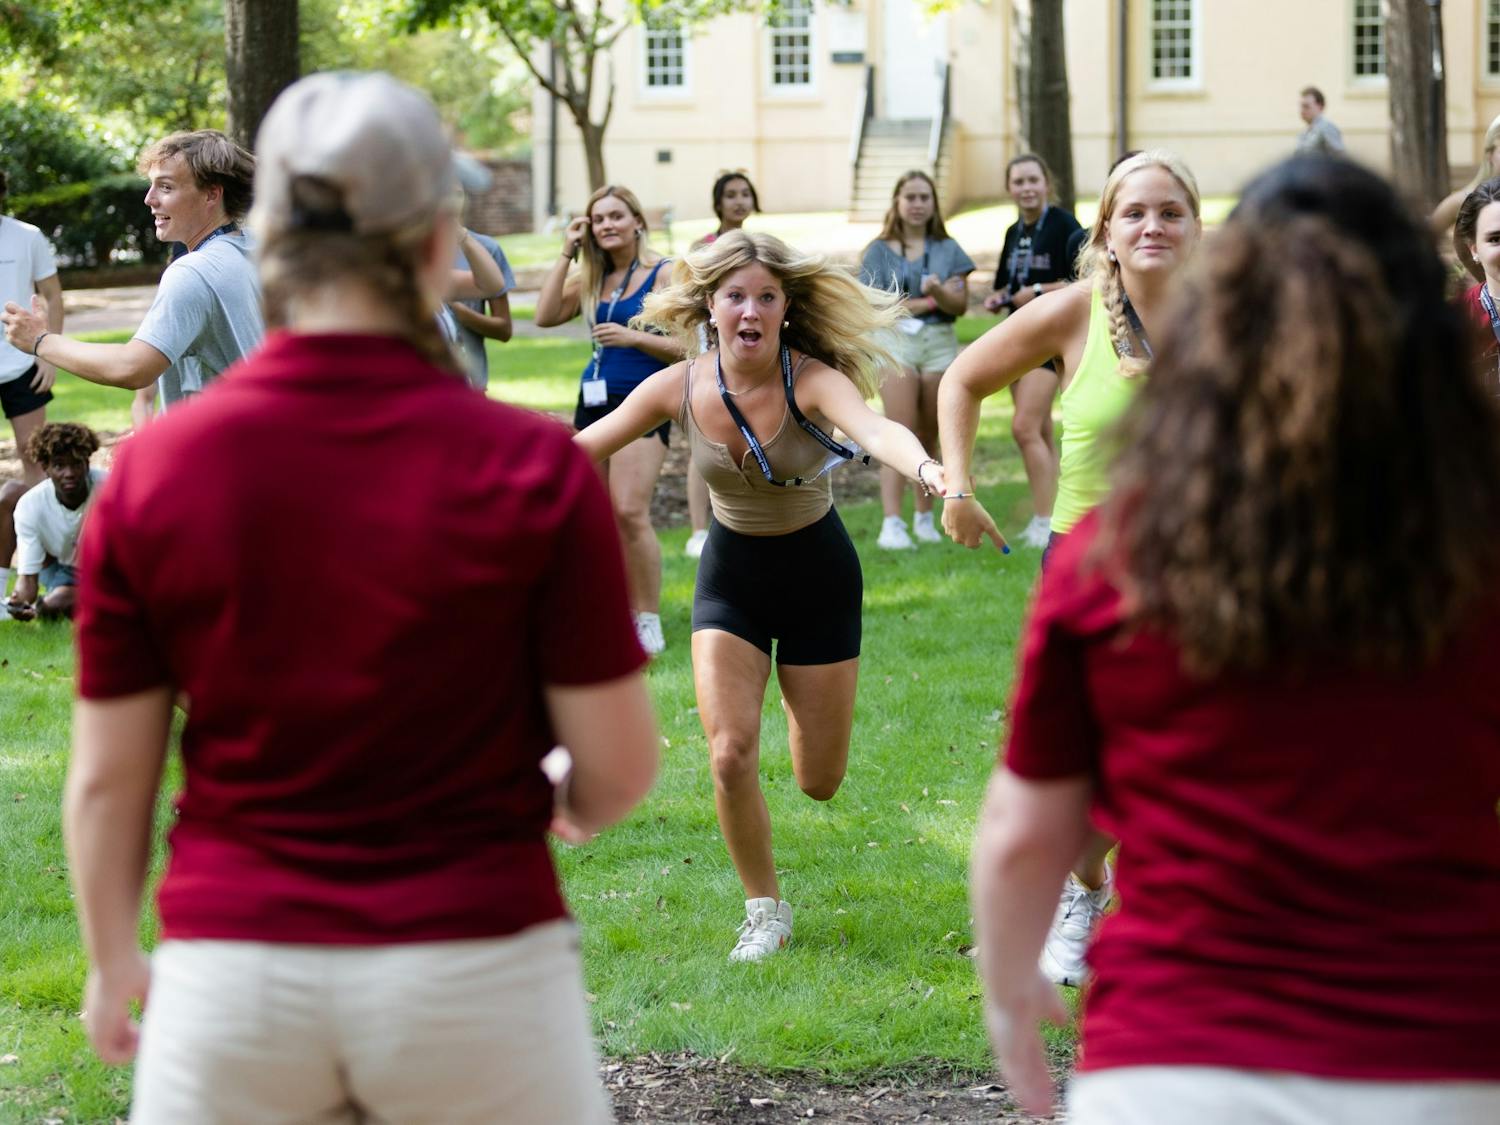 A first-year student drags her friend by the hand, hoping to be the first one to bring her orientation leaders an in-state state student during a game on July 20, 2022. Students listened to presentations, toured campus and played games during orientation sessions held throughout the summer.